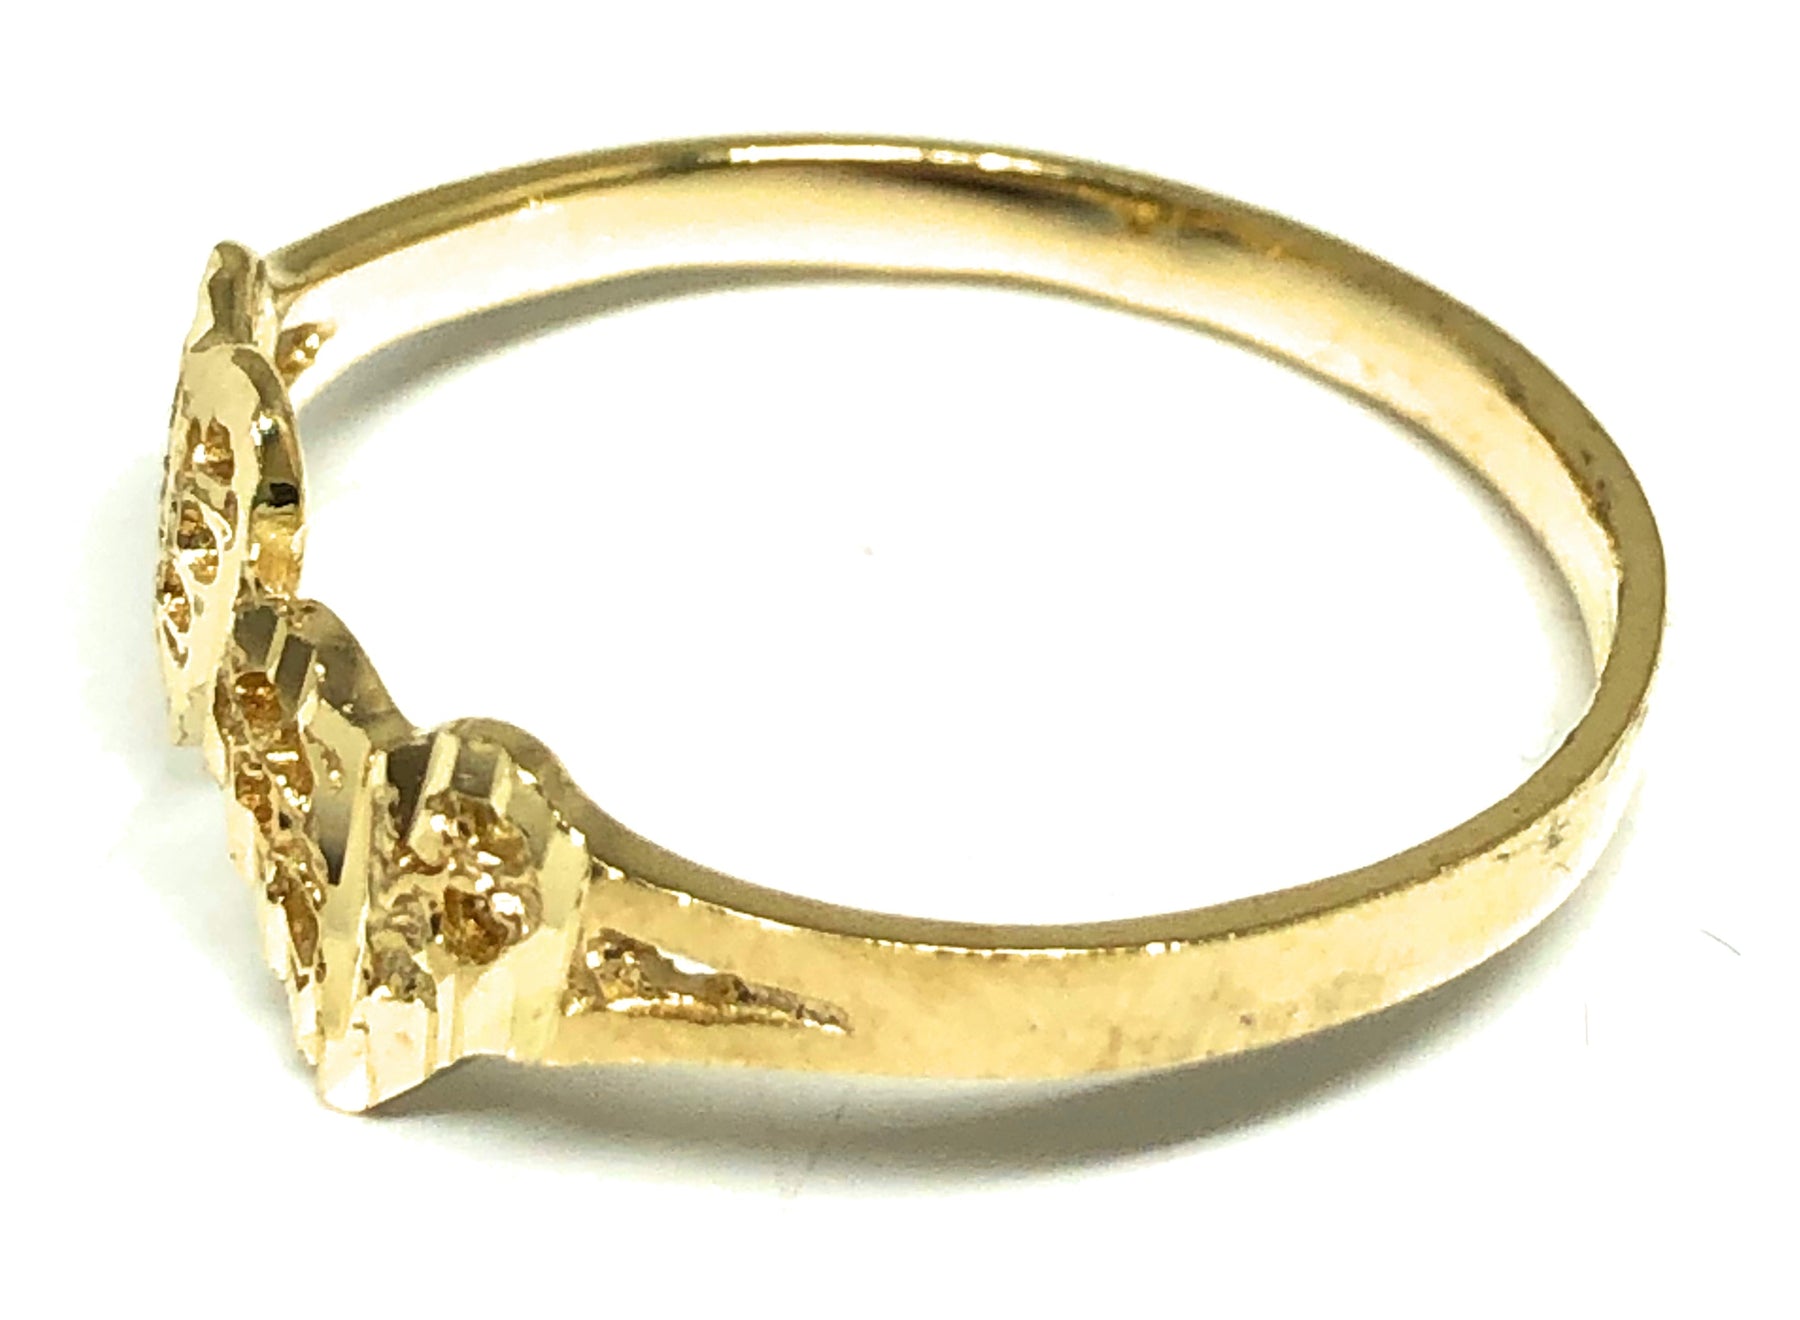 Double Band Heart Ring, Gold plated